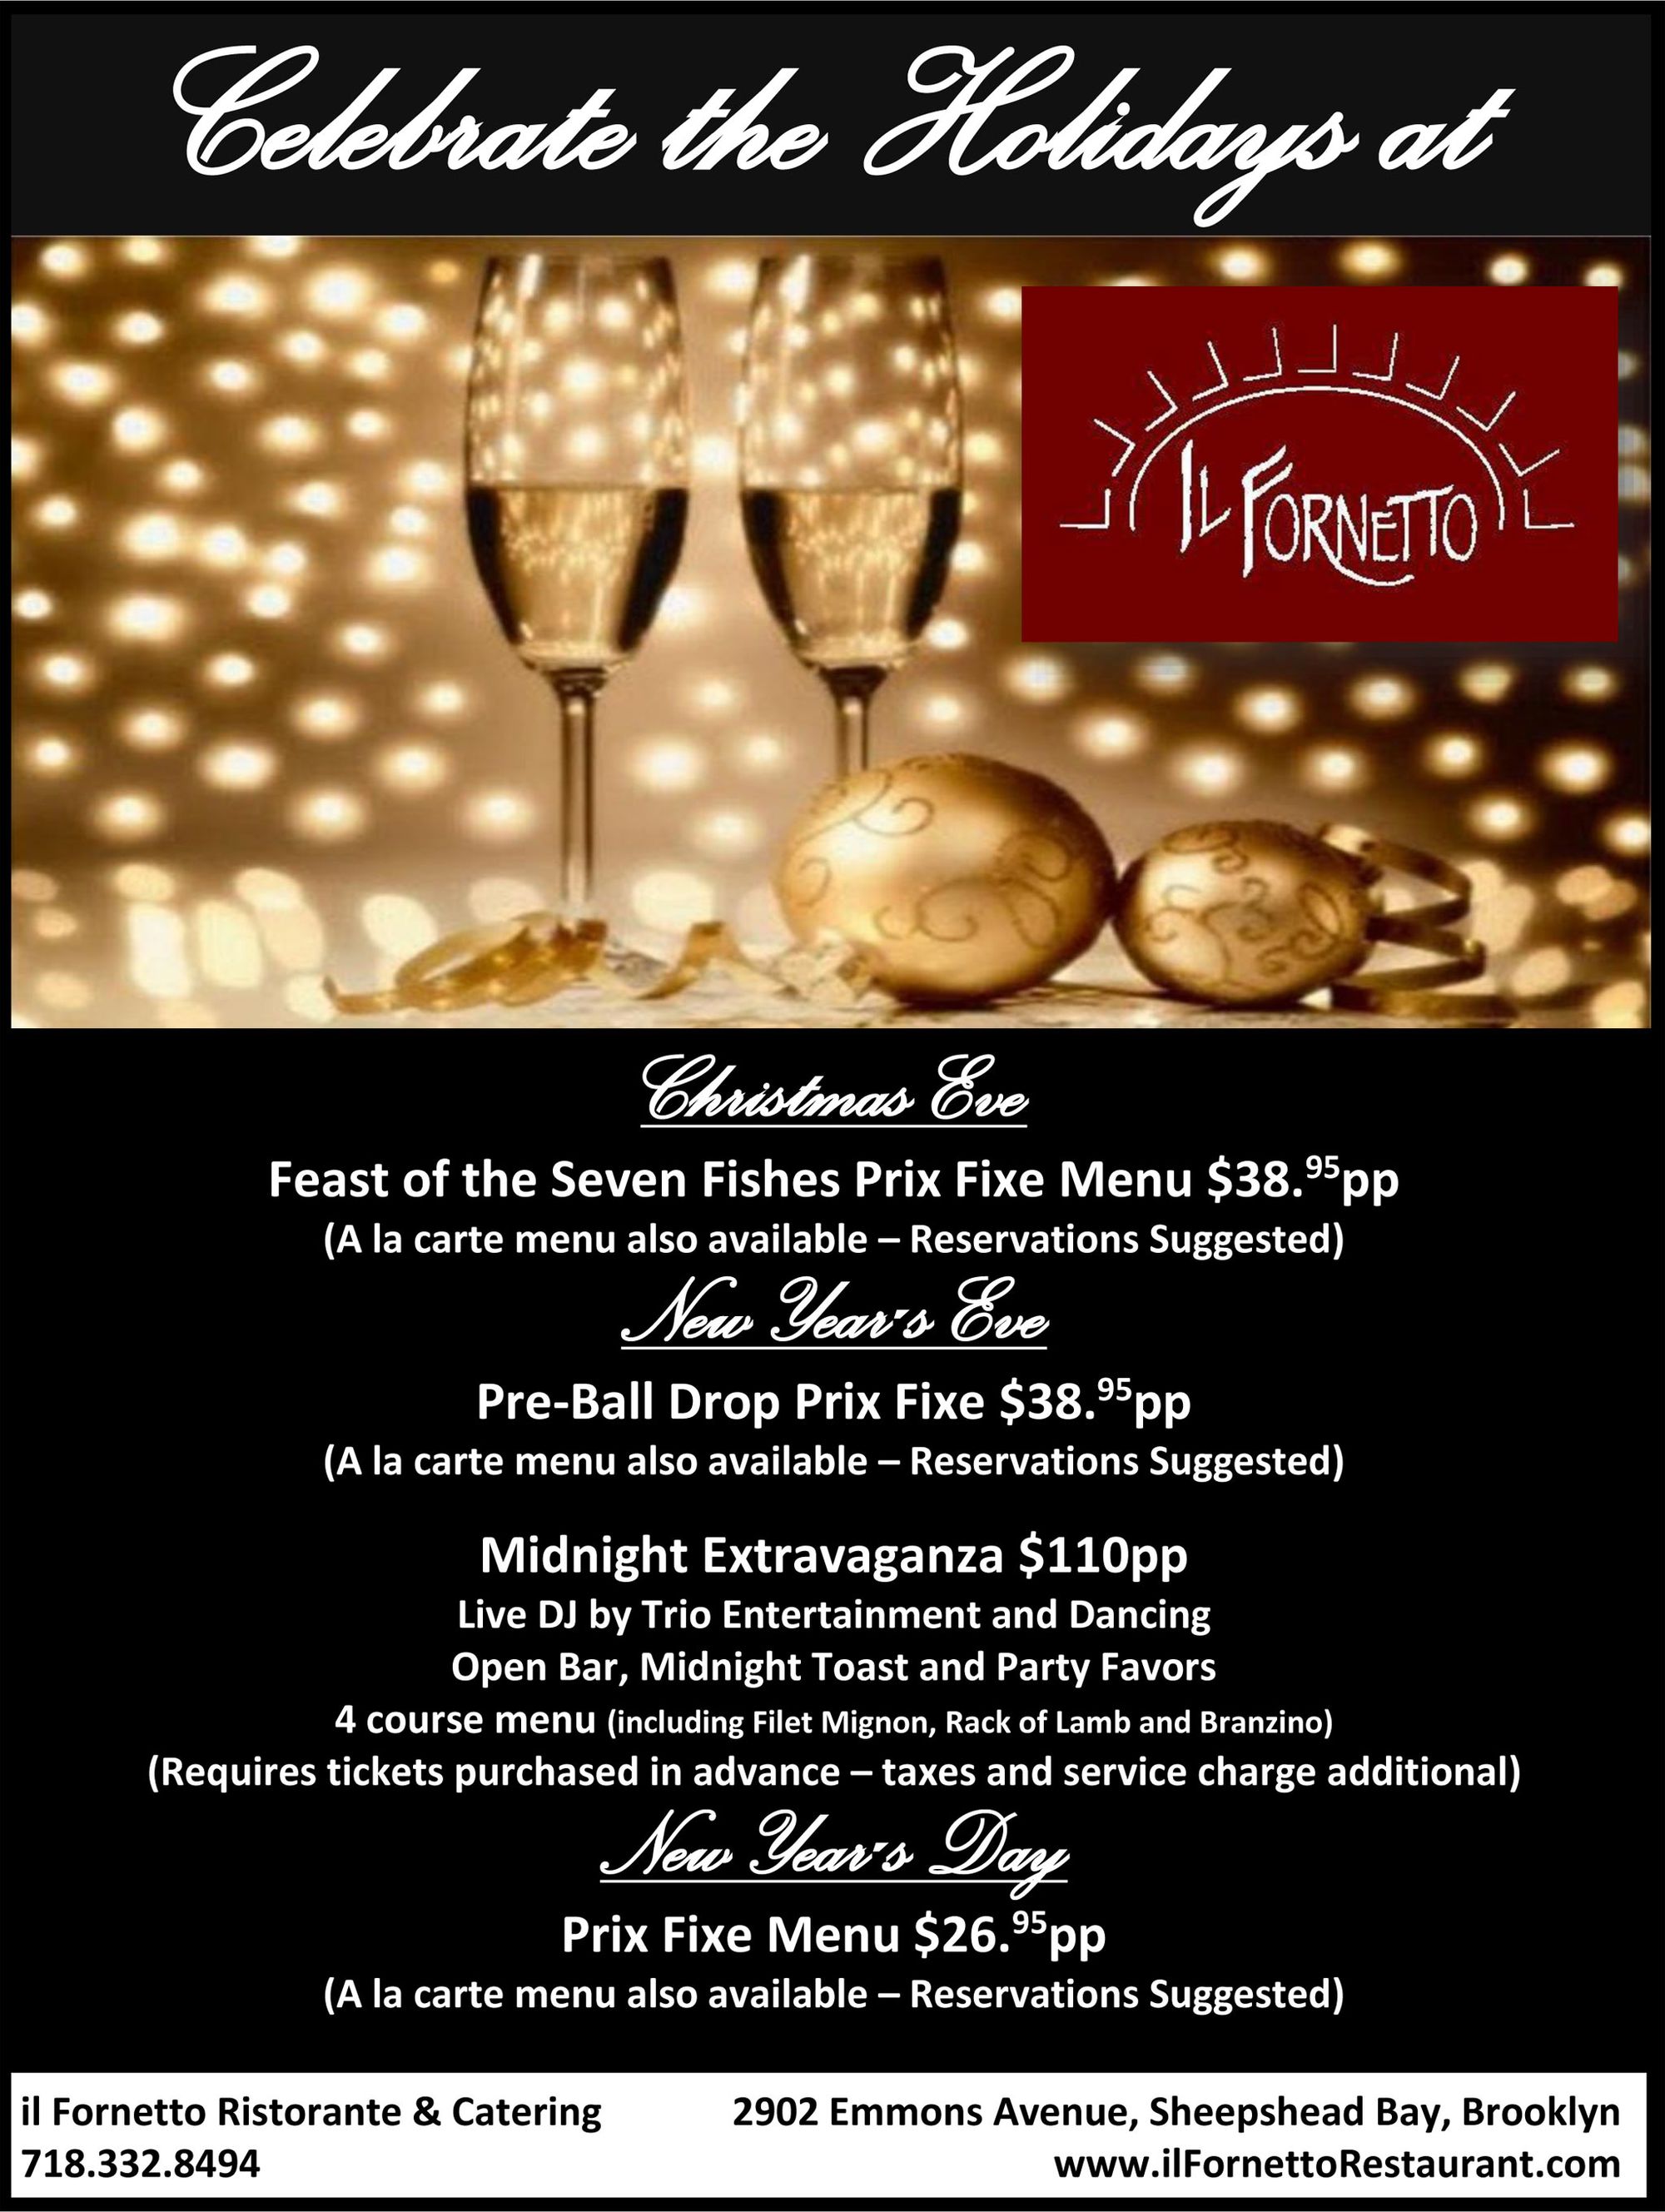 Celebrate Christmas And The New Year With Il Fornetto’s Special Prix Fixe Holiday Menus